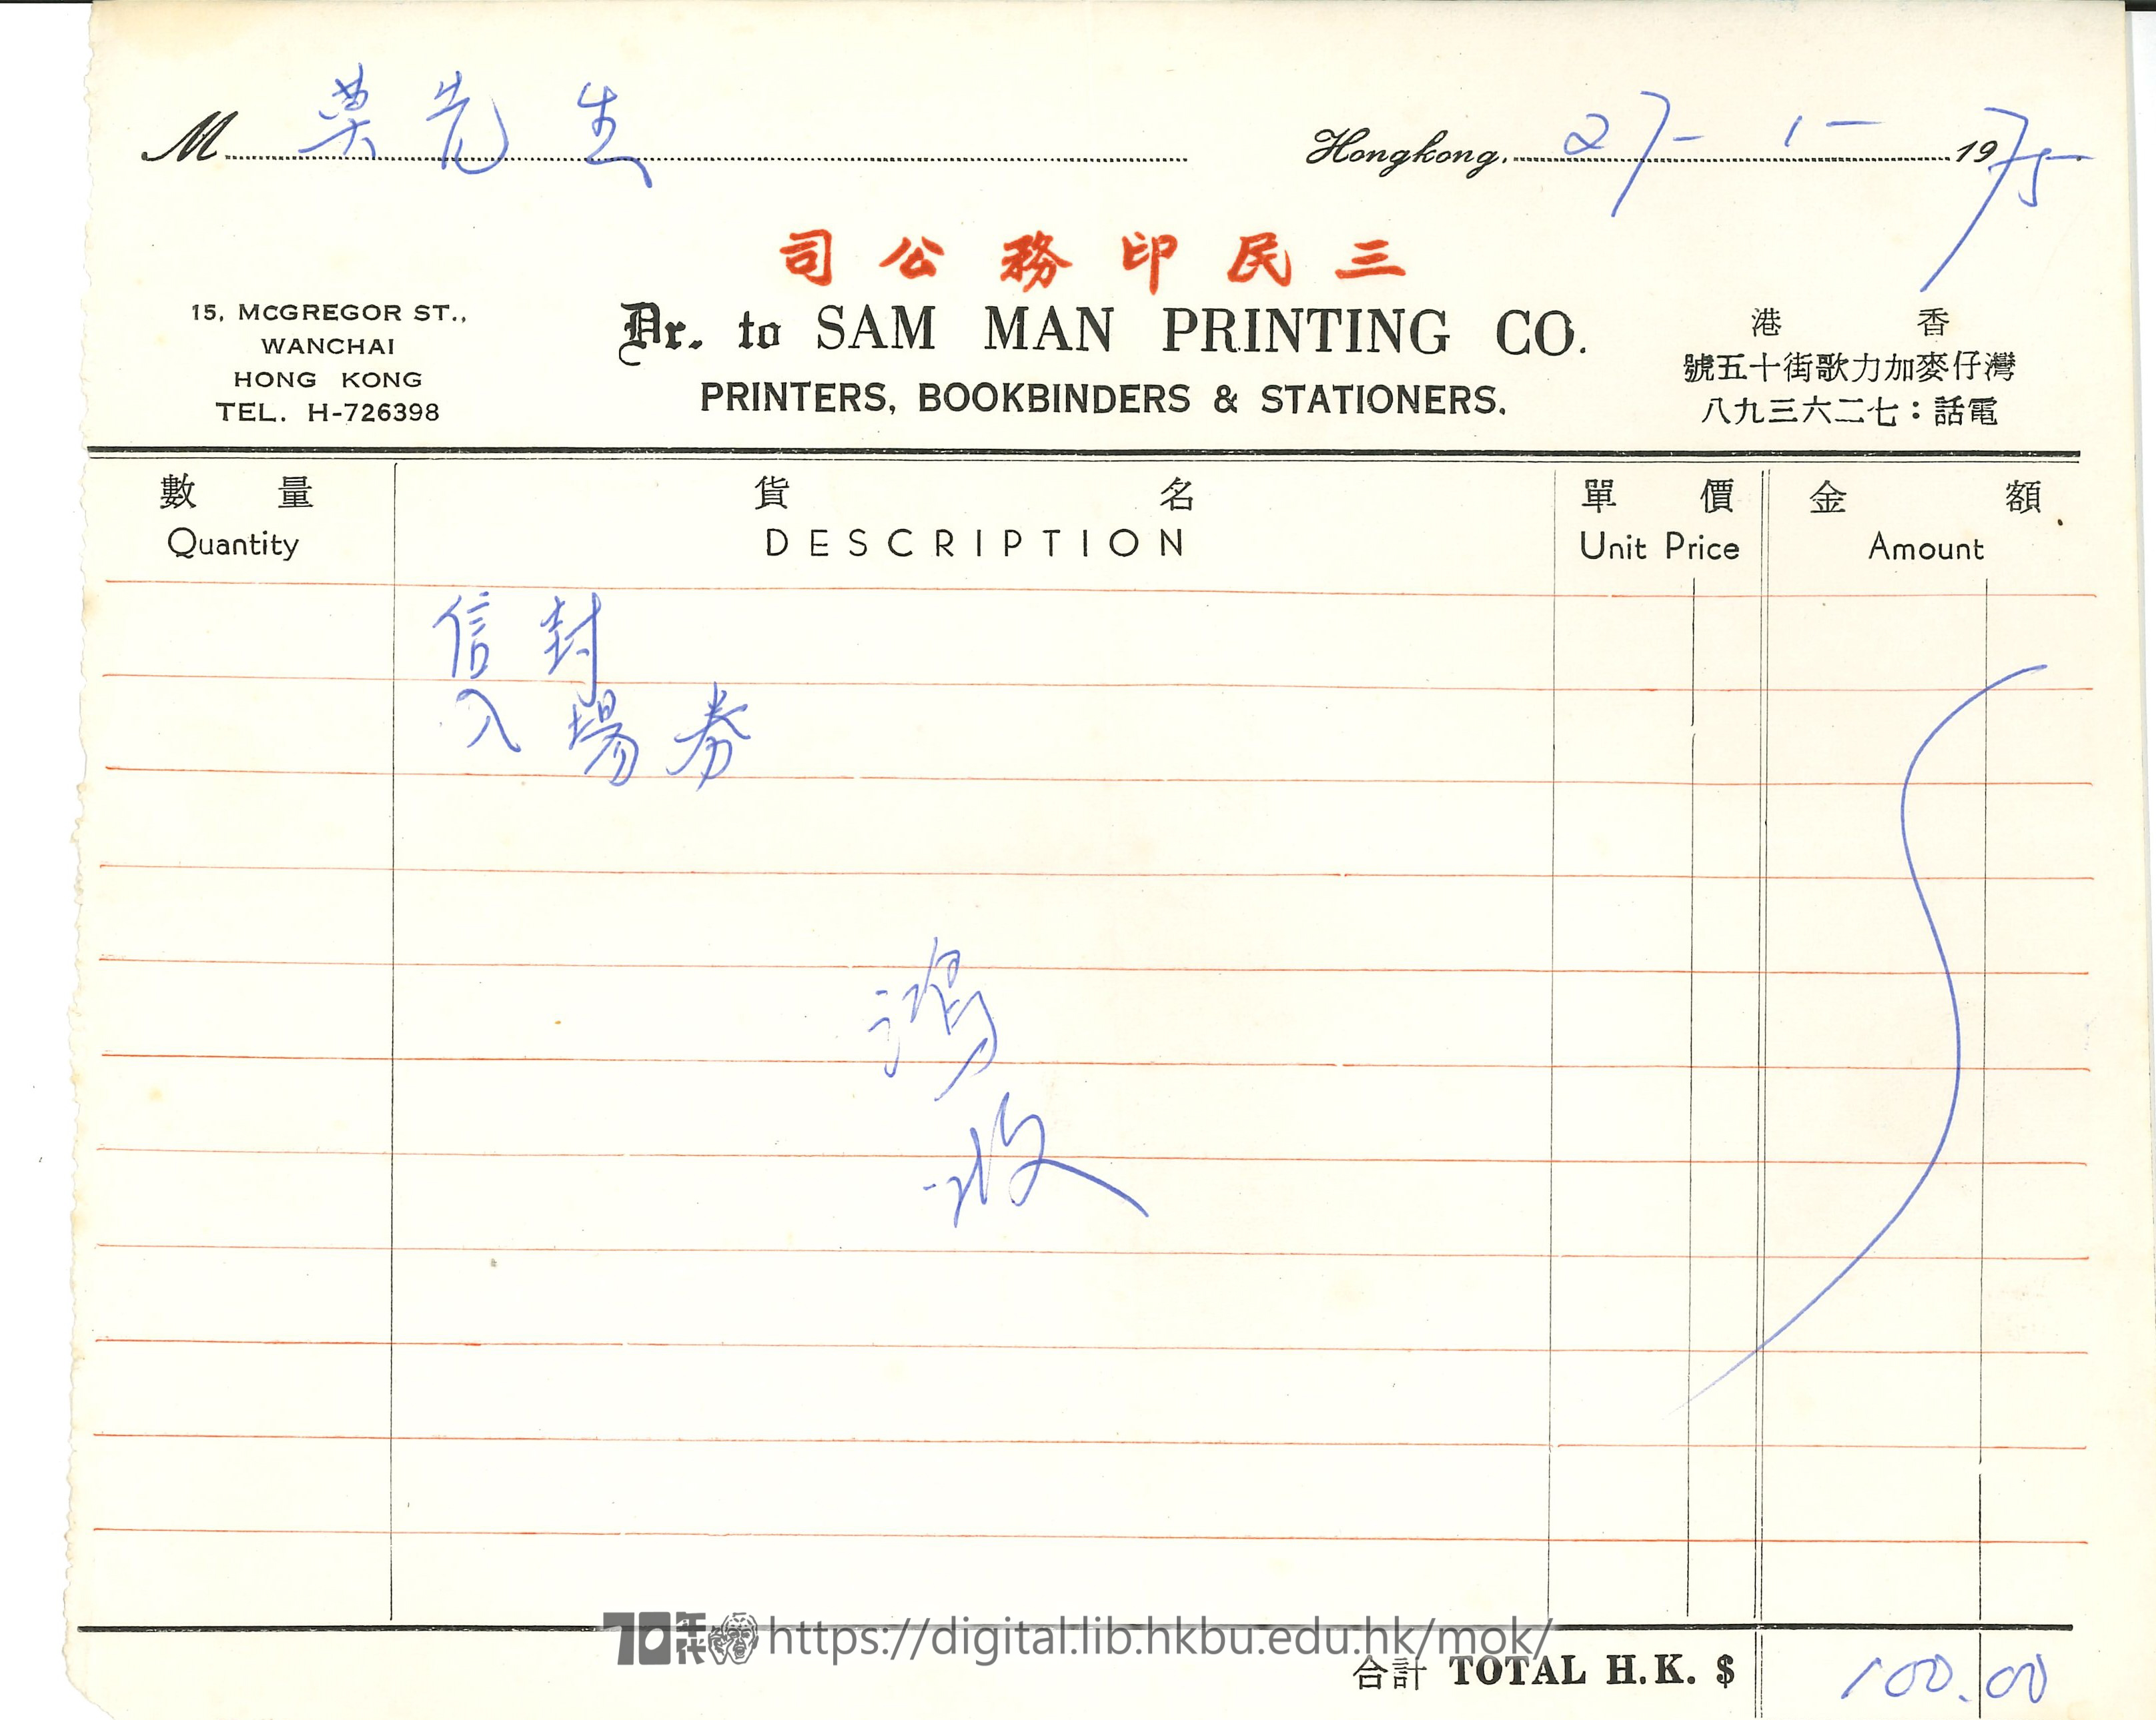   Invoice from Dr. To Sam Man Printing Co. to Mok Chiu Yu Dr. To Sam Man Printing Co. 